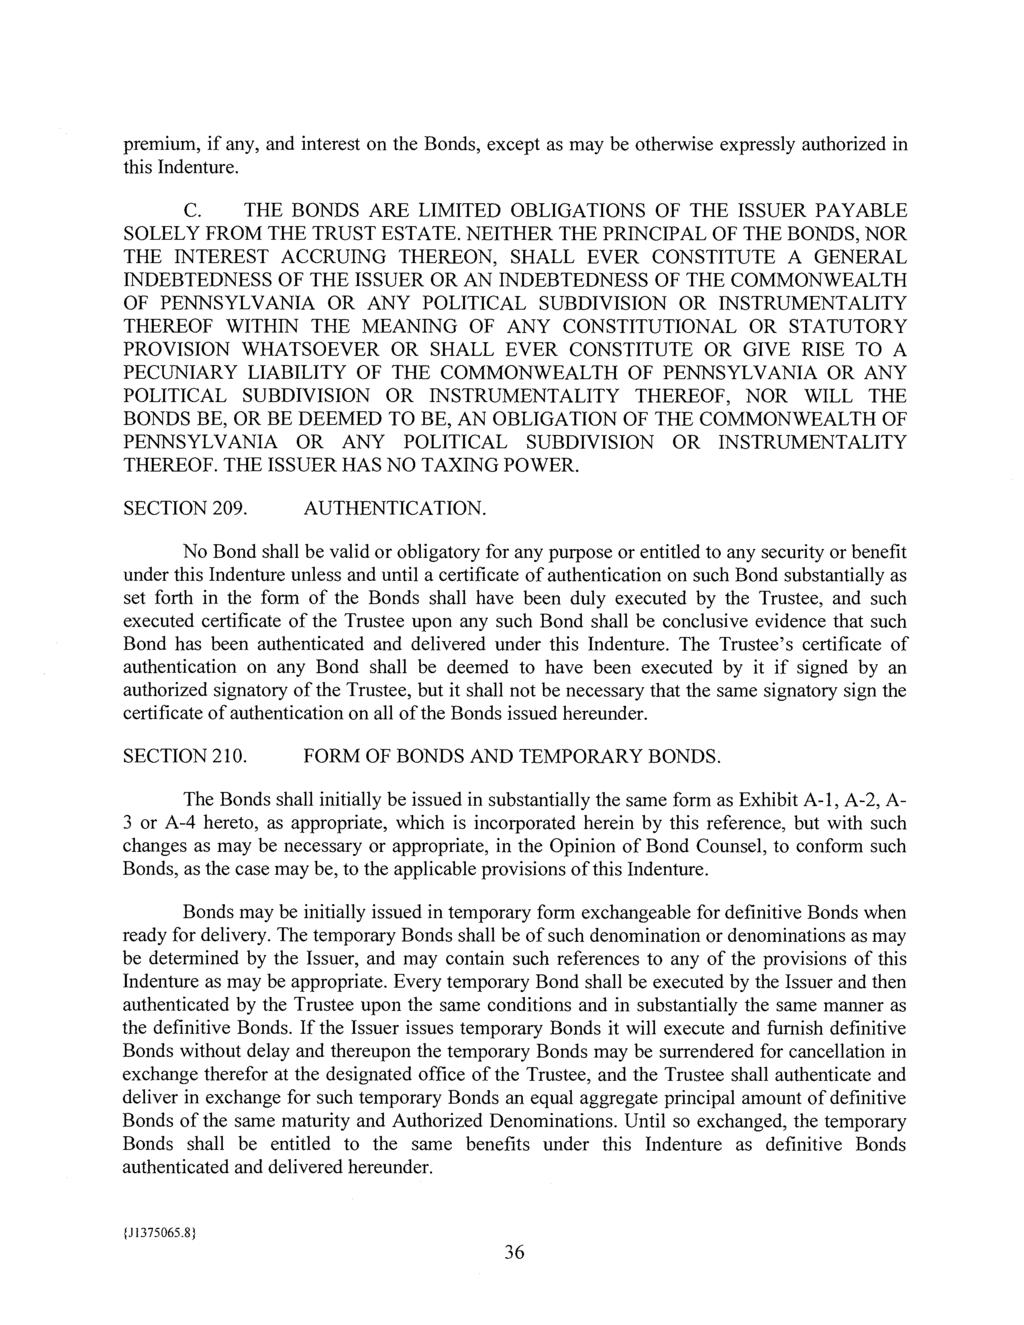 premium, if any, and interest on the Bonds, except as may be otherwise expressly authorized in this Indenture. C. THE BONDS ARE LIMITED OBLIGATIONS OF THE ISSUER PAY ABLE SOLELY FROM THE TRUST ESTATE.